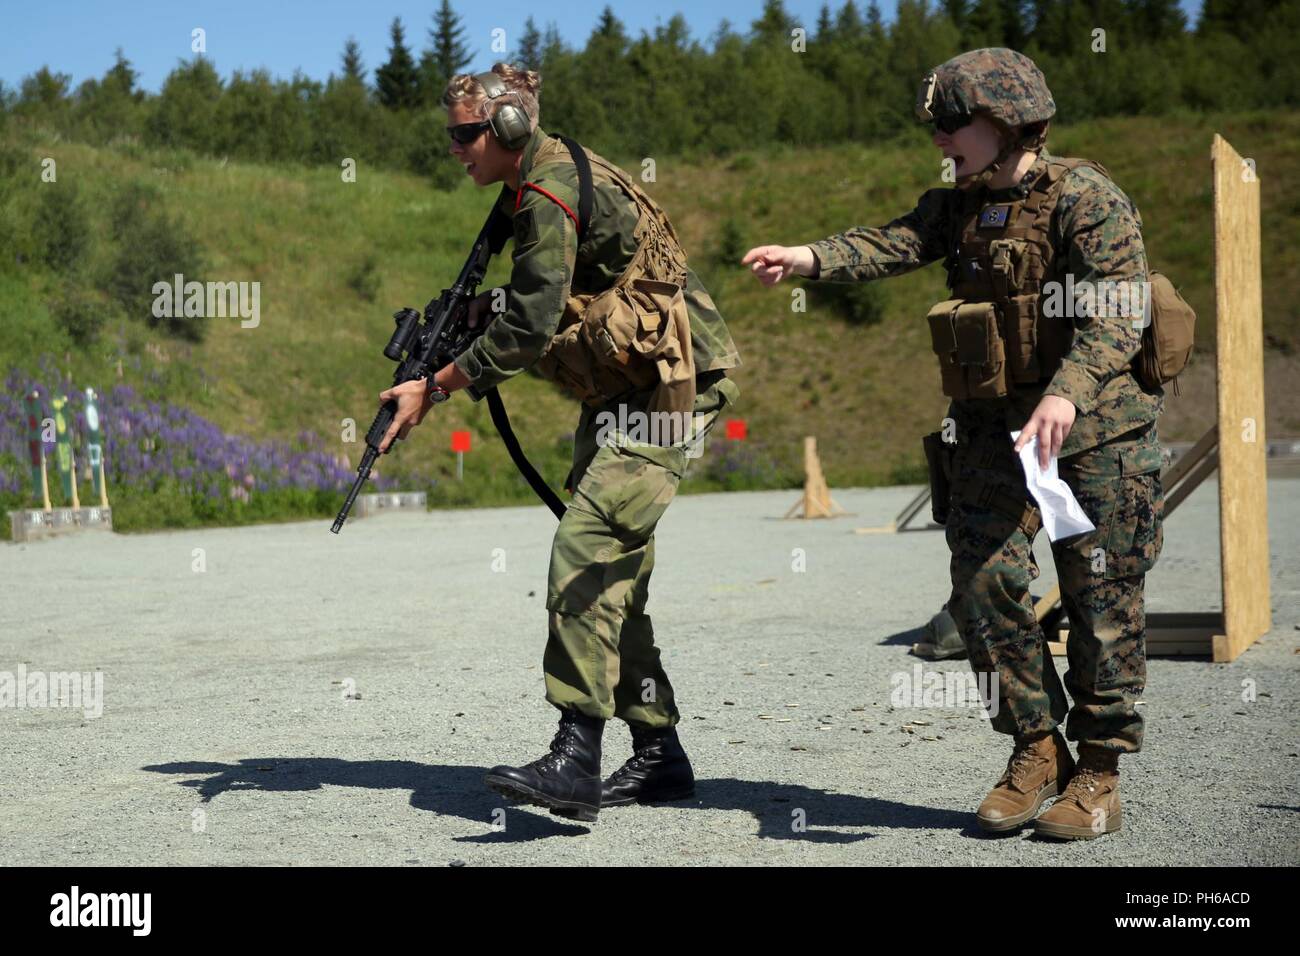 A U.S. Marine with Marine Rotational Force-Europe 18.1 directs a Norwegian military policeman to a barricade during a weapon transition range at Leksdal Skytefelt Training Complex, Norway, June 27, 2018. The multinational training allowed the service members to cross-train with American and Norwegian weapon systems including assault rifles, shotguns, and pistols. Marines and Norwegian soldiers practiced firing from behind barricades and transitioning between weapon systems. Stock Photo